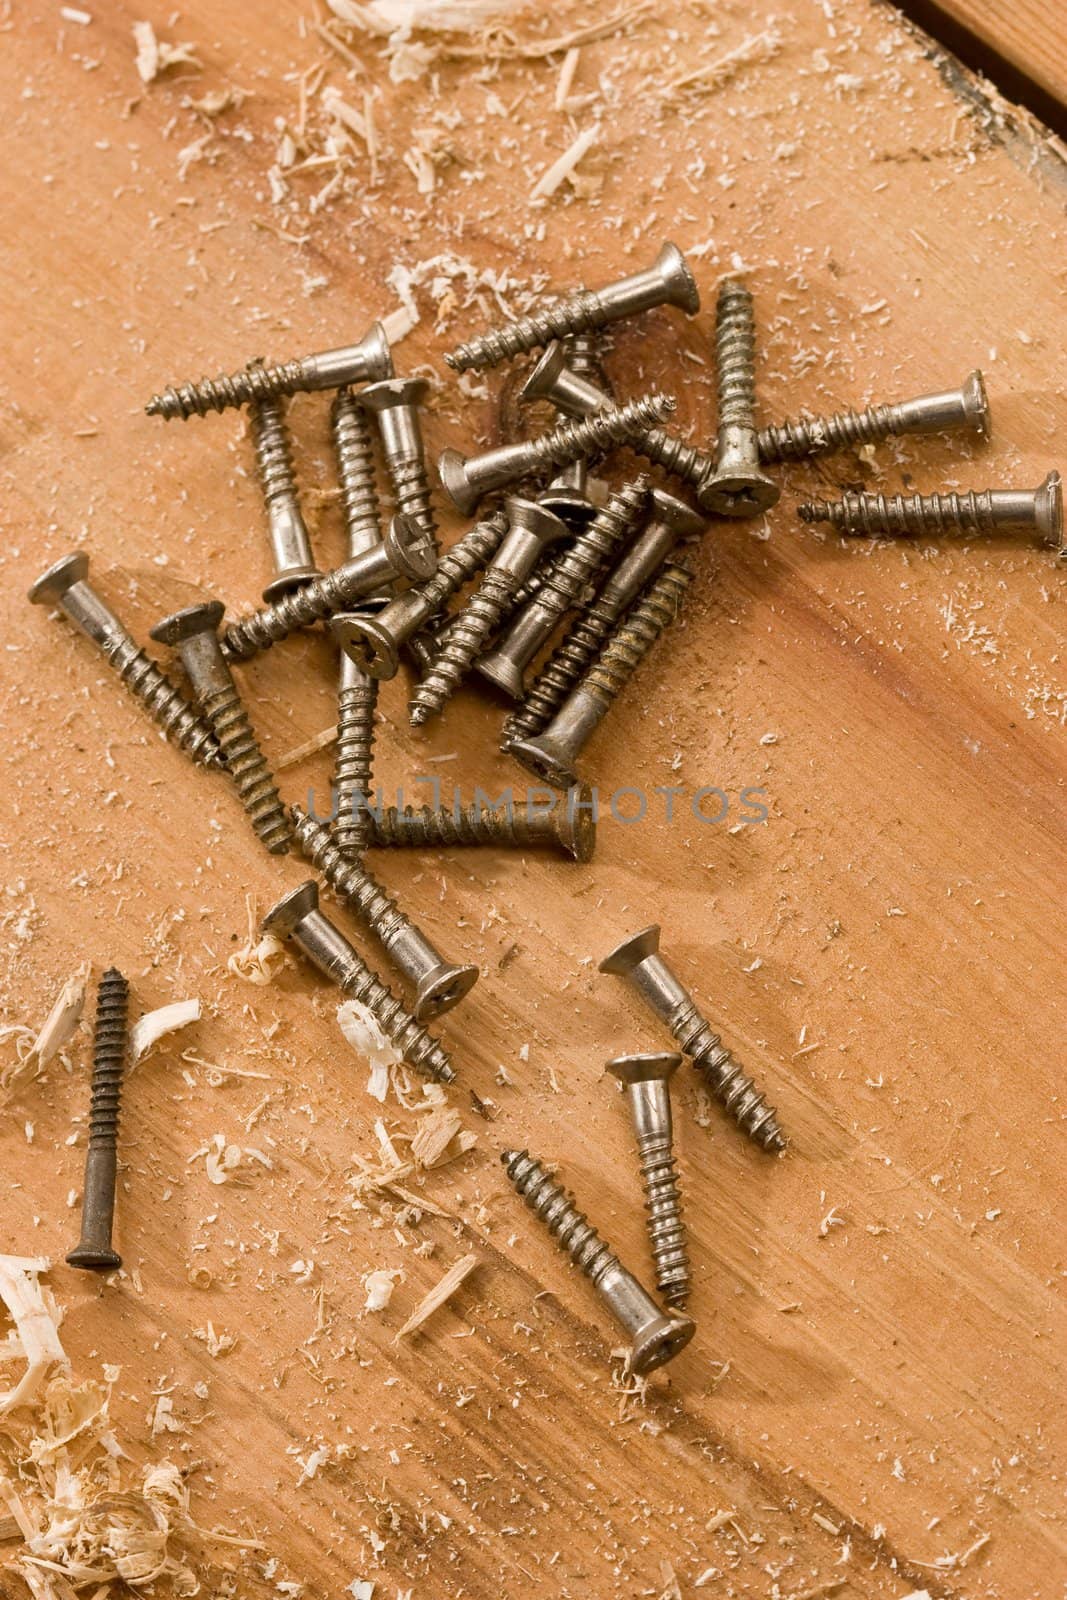 tools series: some metal screw on the wooden plank